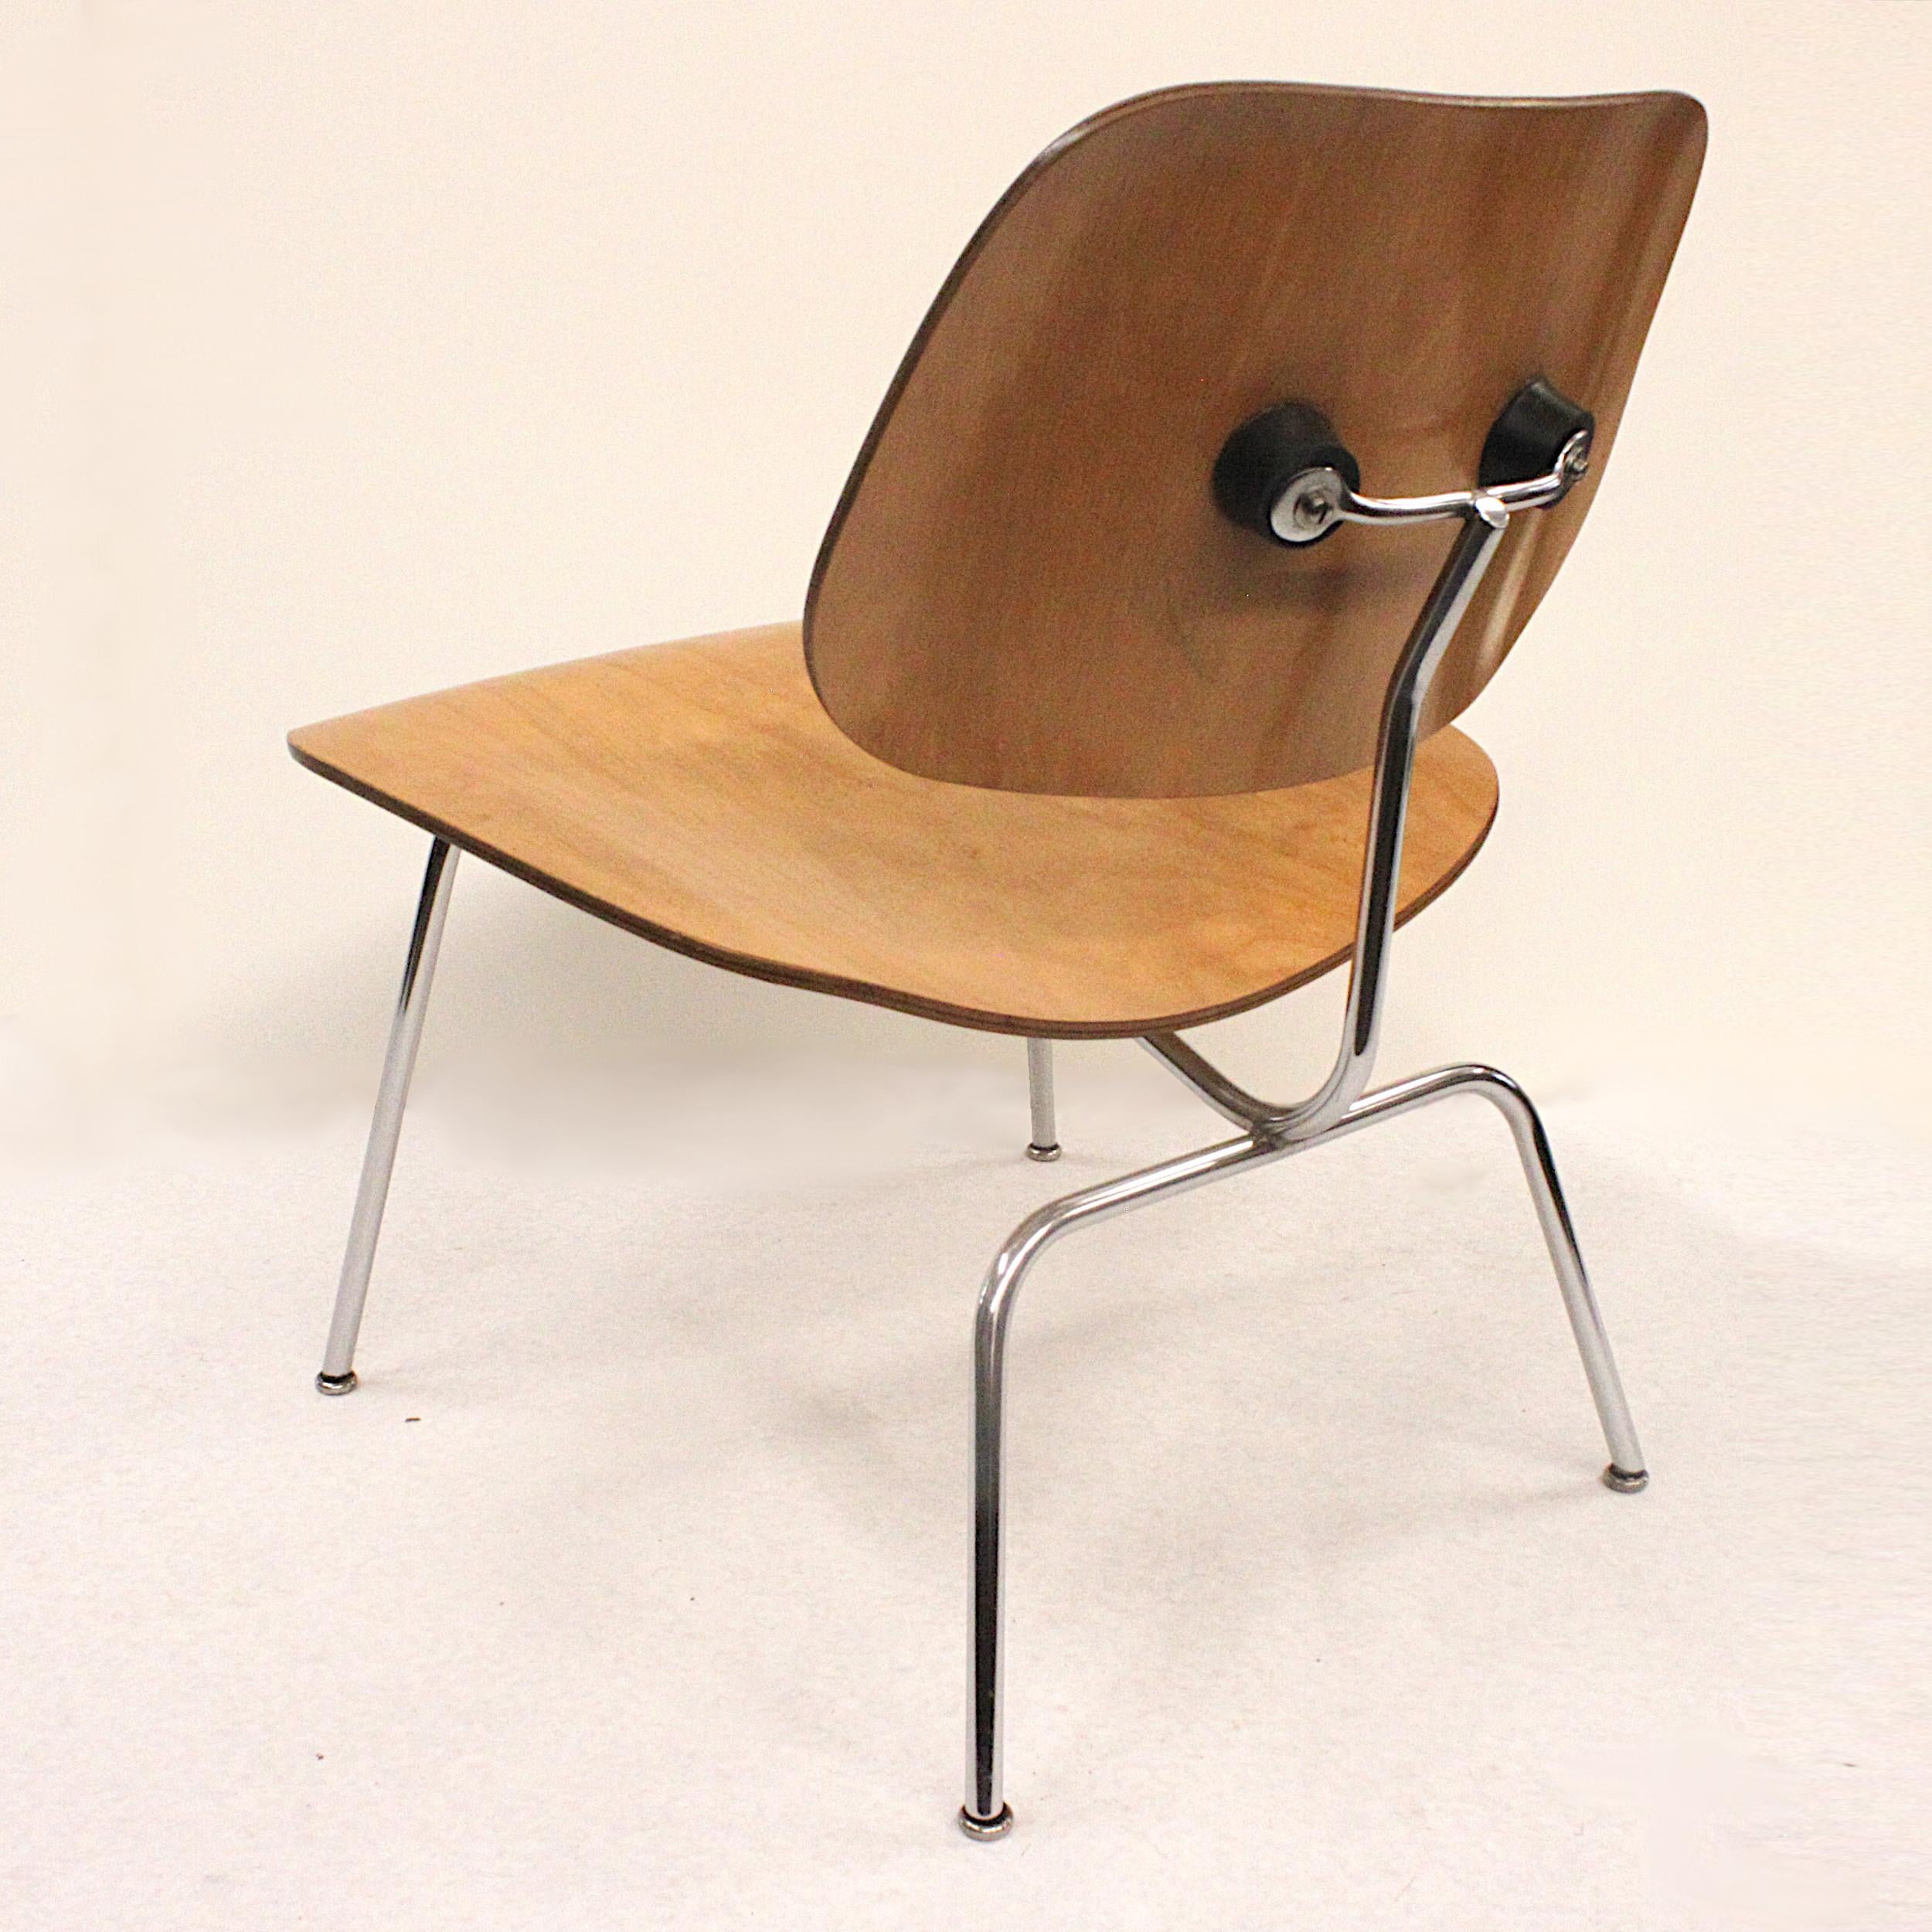 Mid-20th Century Early 1950s Mid-Century Modern Eames LCM Birch Lounge Chair by Herman Miller